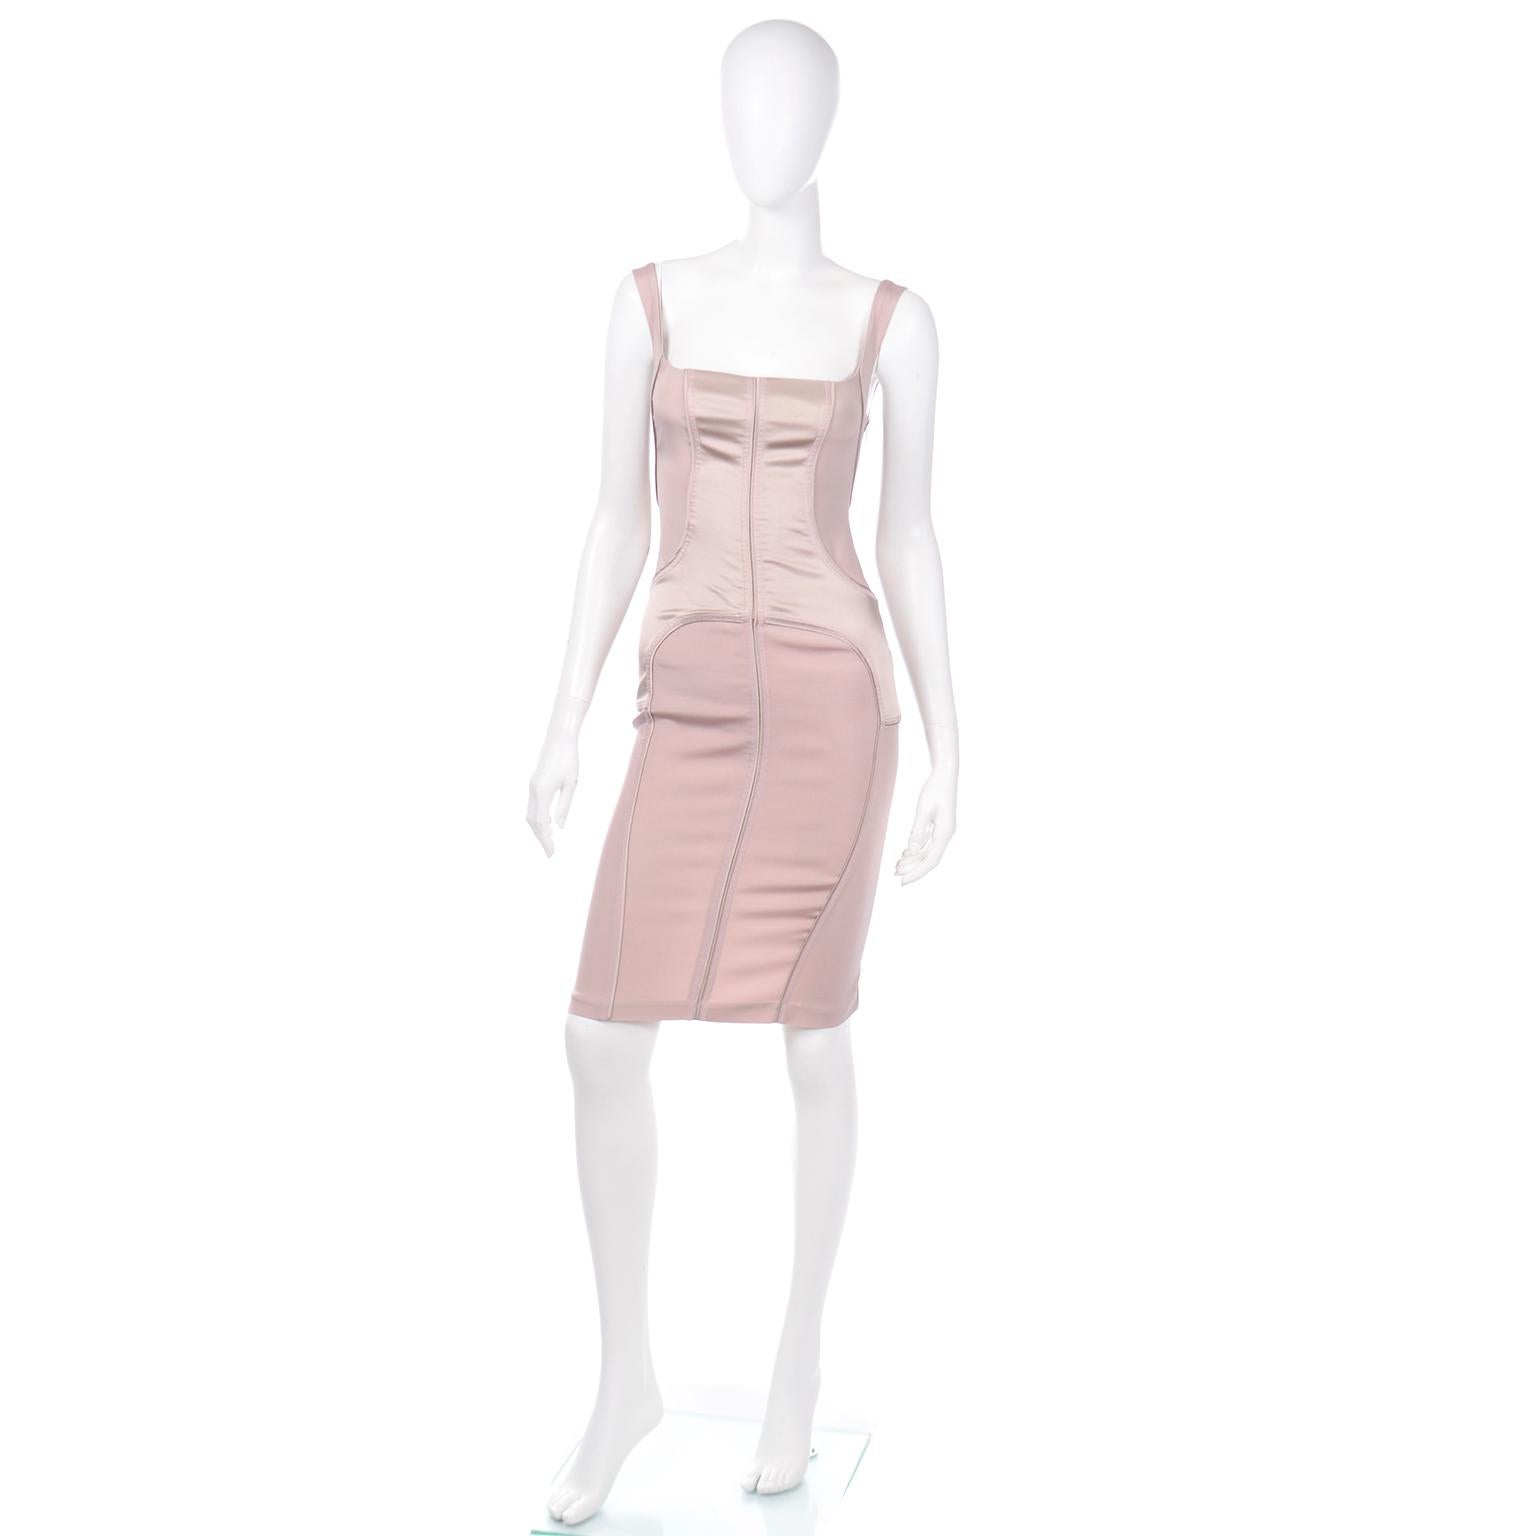 This sensational 2003 Gucci bodycon silk blend dress was designed by Tom Ford and we love the silhouette! The matte and satin mauve nude dress closes with a side zipper and has decorative top stitching and trim with a corset style fit We estimate